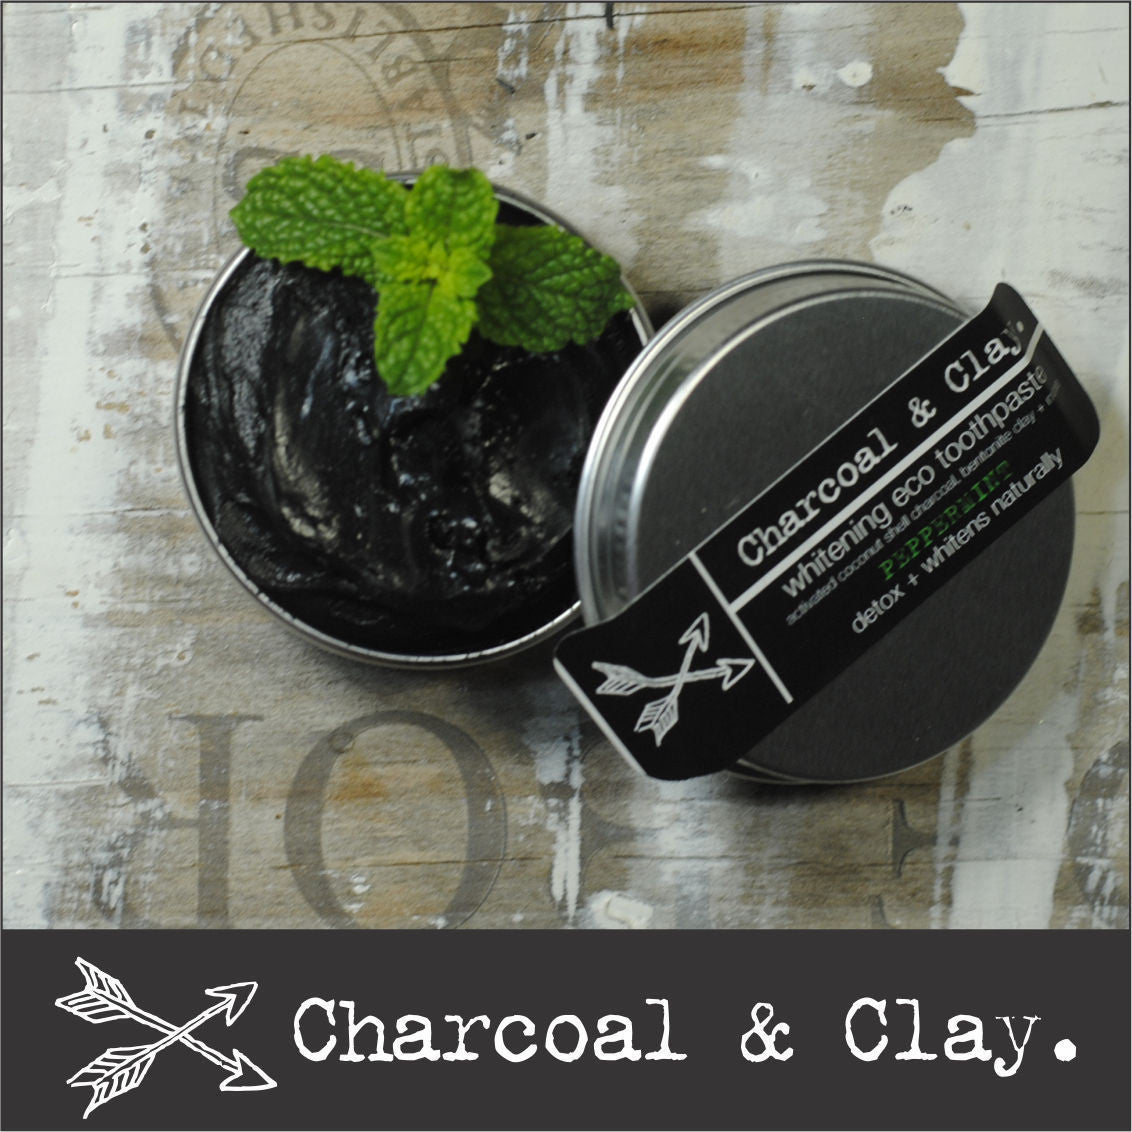 100% PURE ACTIVATED CHARCOAL POWDER Teeth Whitening Detox Mask + mor - pure  gaia essence